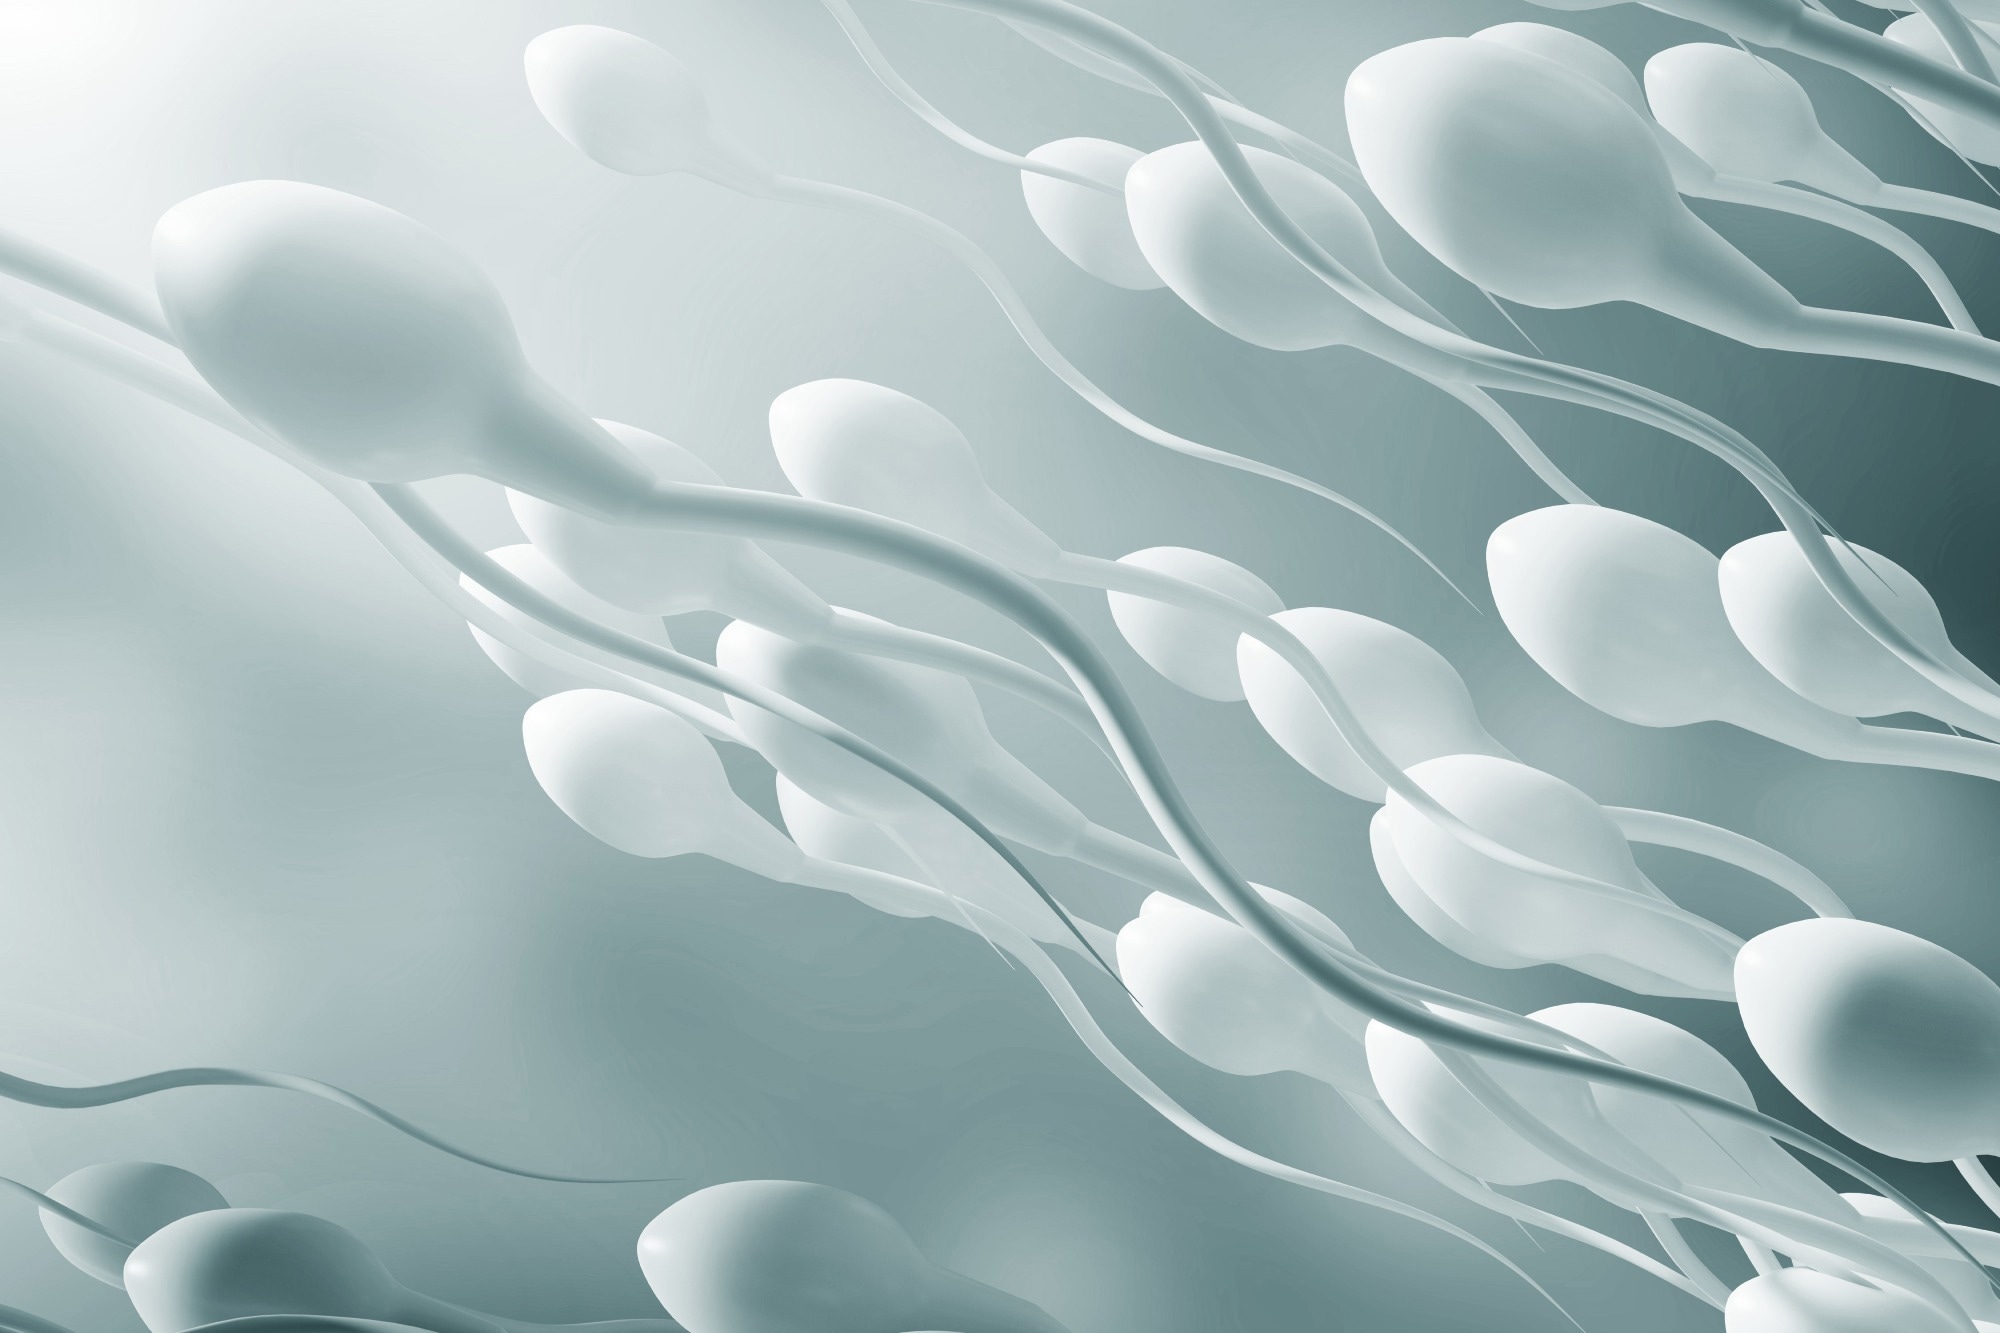 Study: Semen microbiota are dramatically altered in men with abnormal sperm parameters. Image Credit: KateStudio/Shutterstock.com